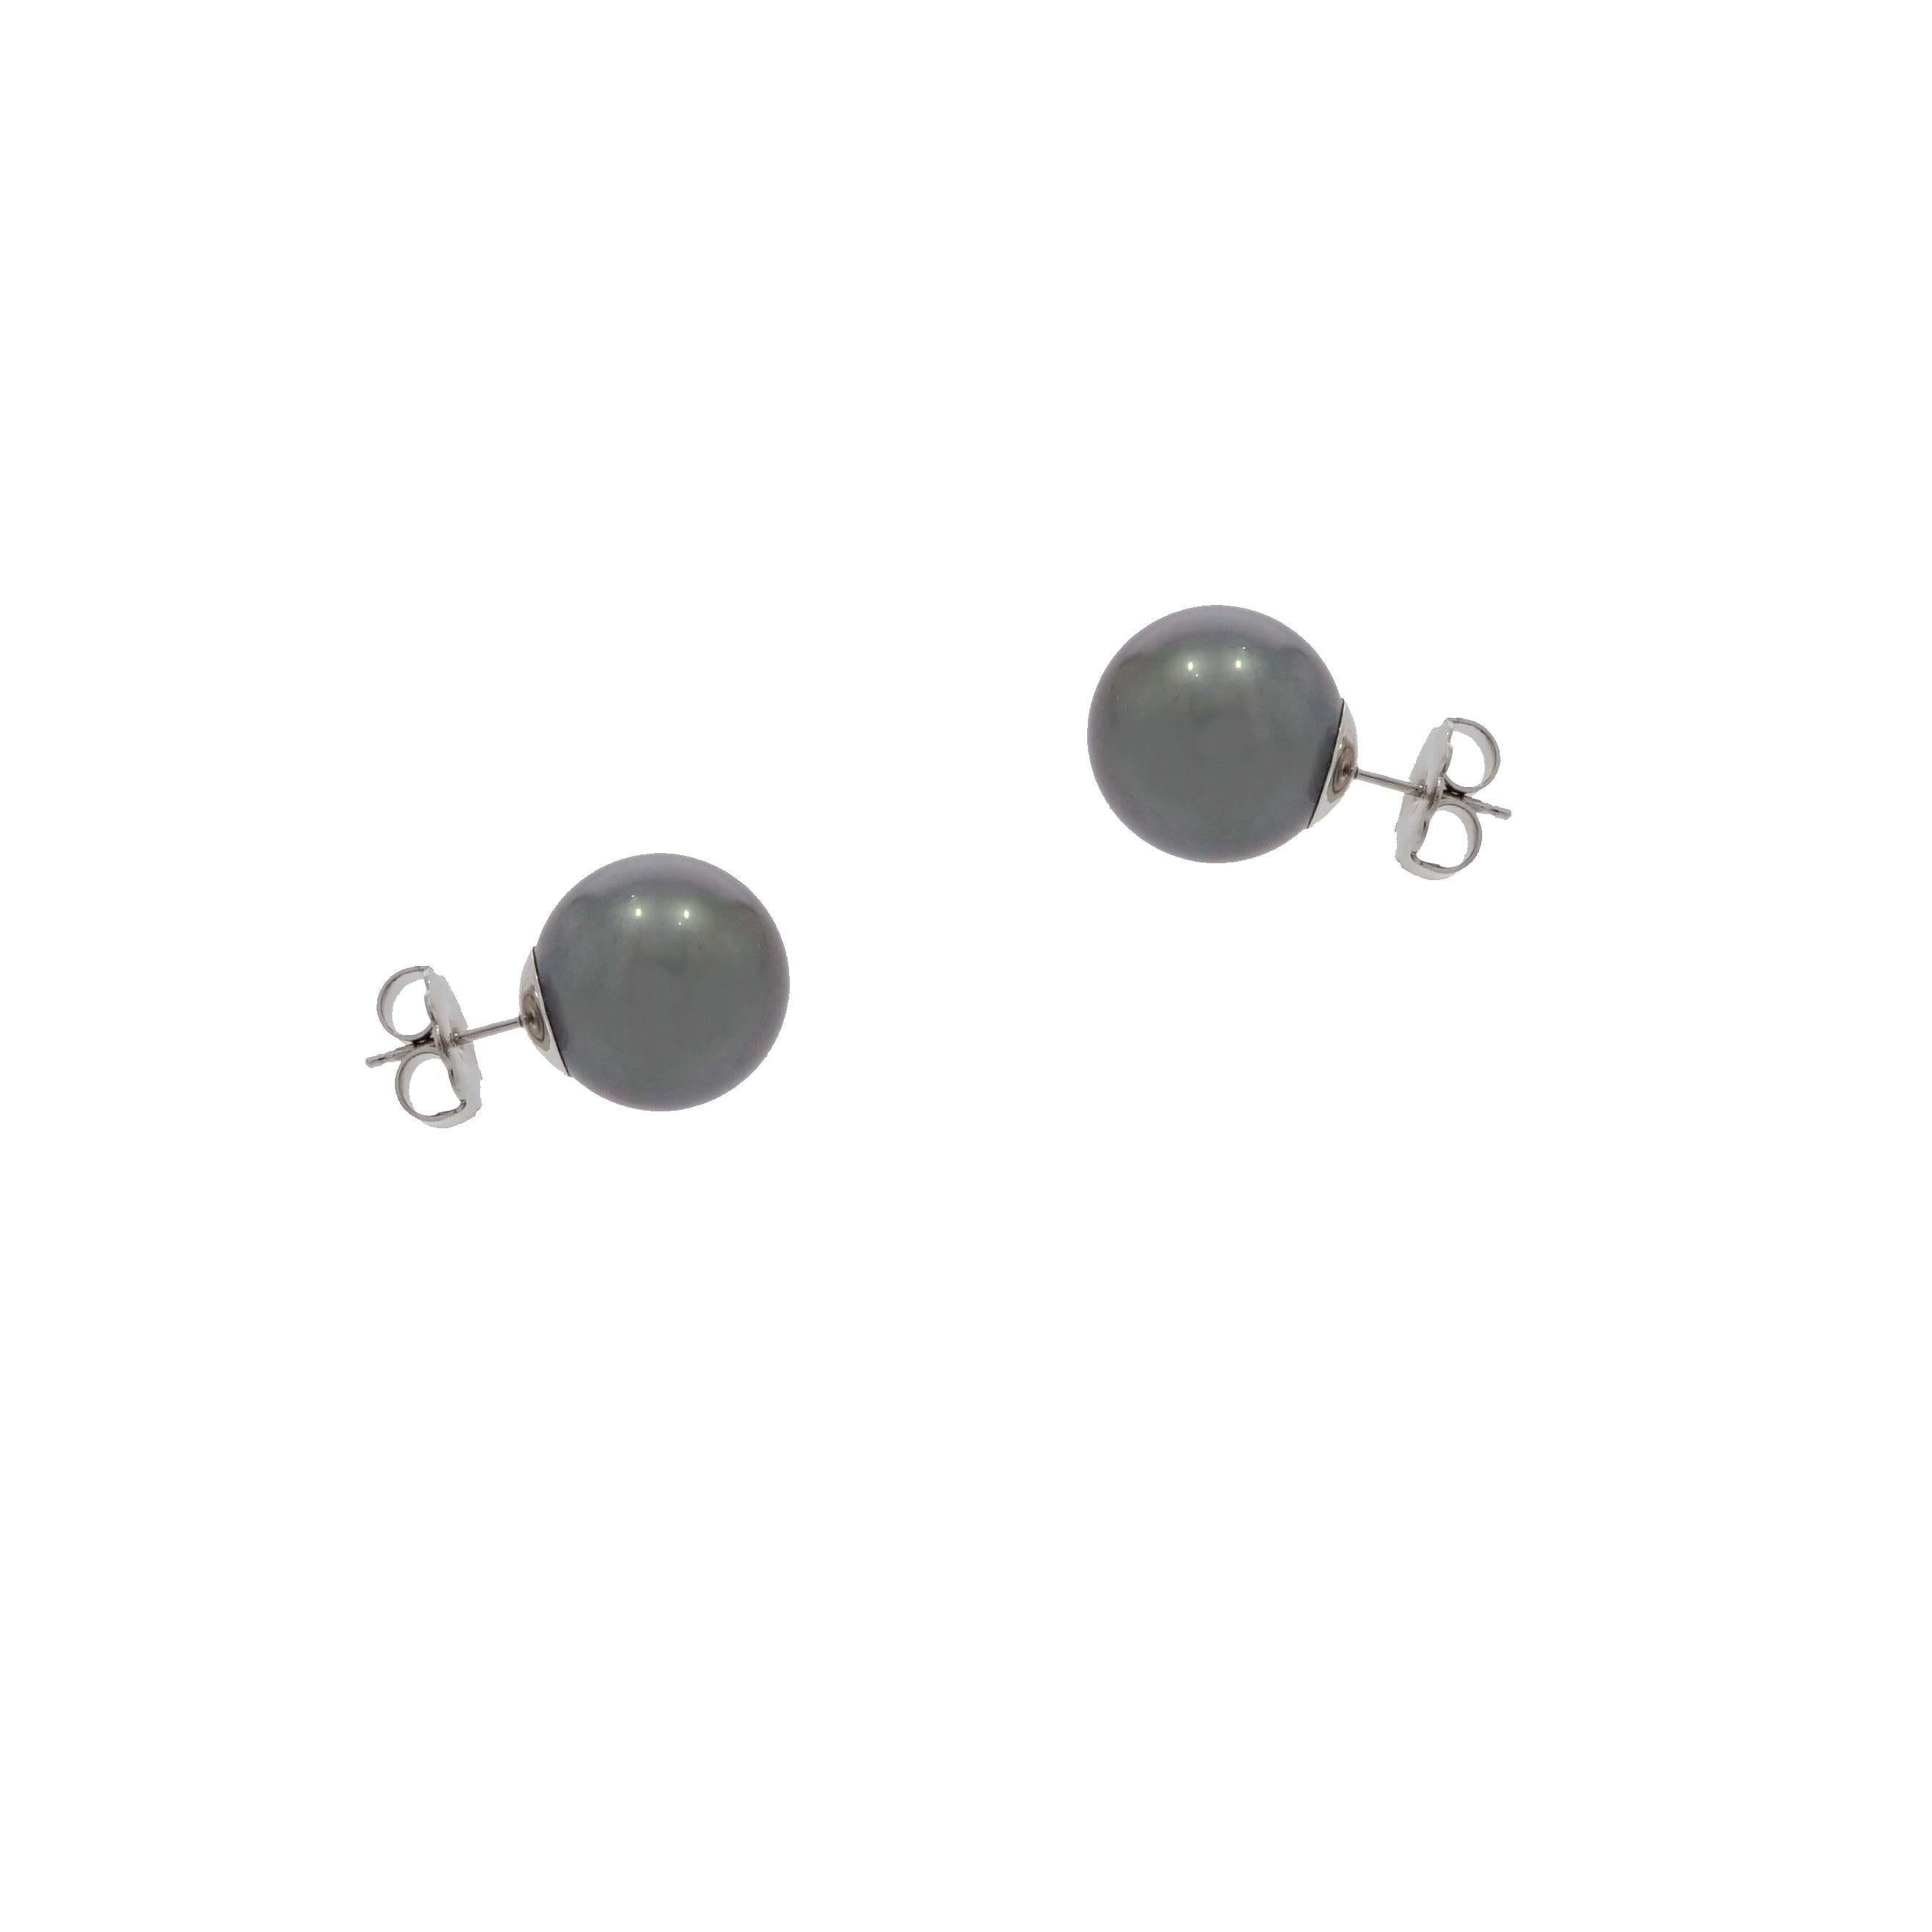 TARA has crafted exquisite jewelry for the world's most discerning customers for more than 45 years and  continues to evolve creating jewelry that is elegant, classic and contemporary.
This Gray Cultured Tahitian Pearl 15.5-15mm Stud earrings, is